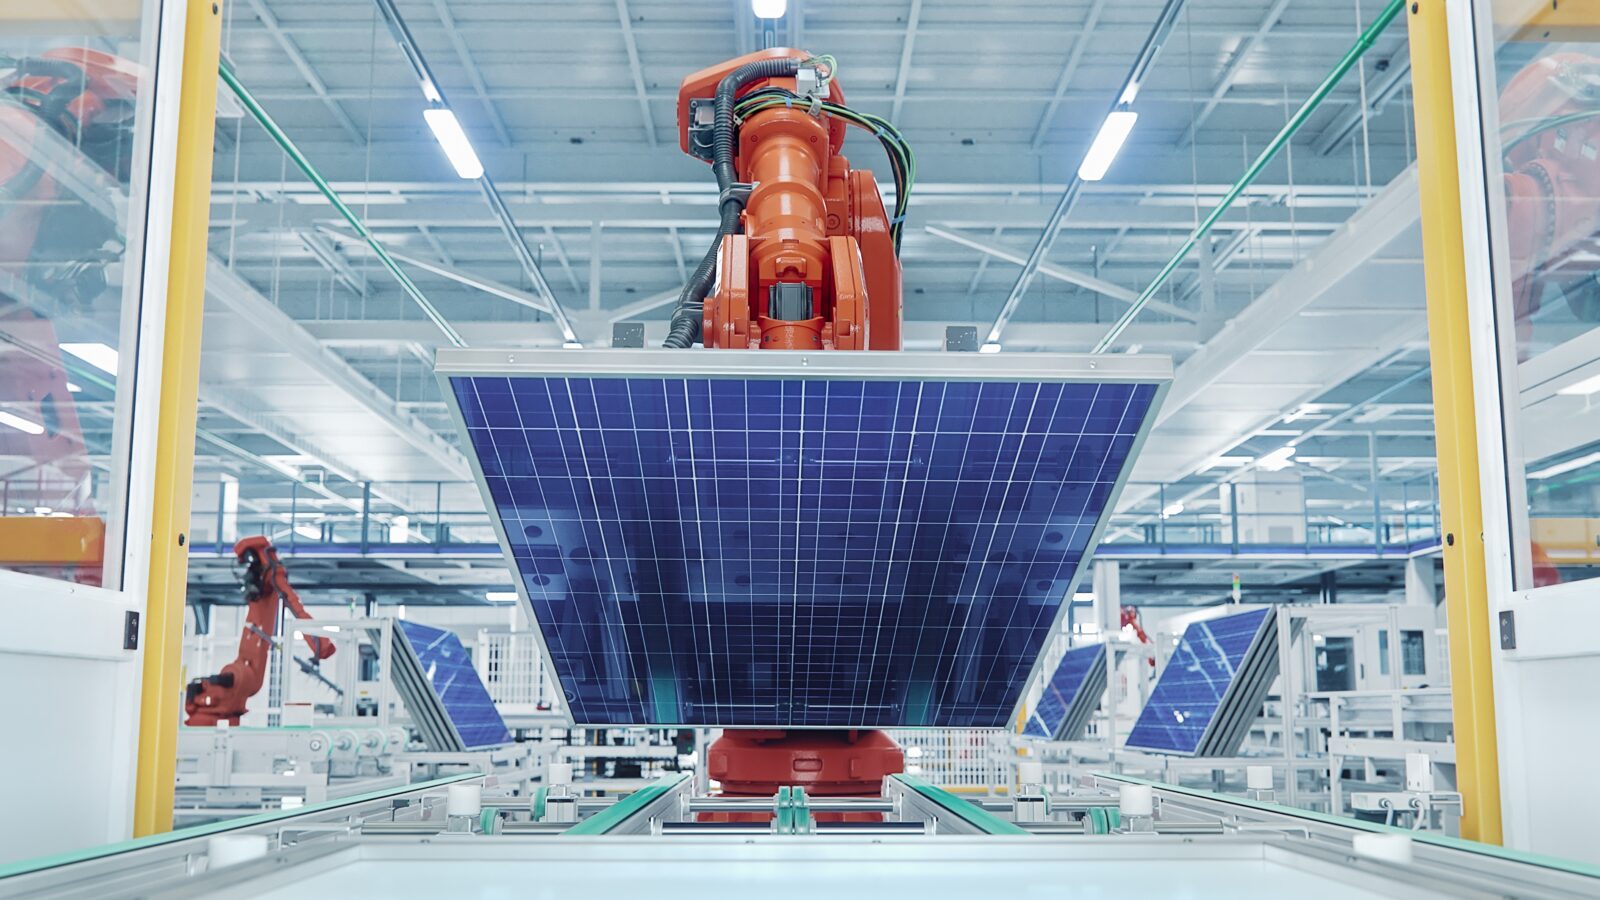 A solar panel on a solar panel manufacturing line on its way to testing